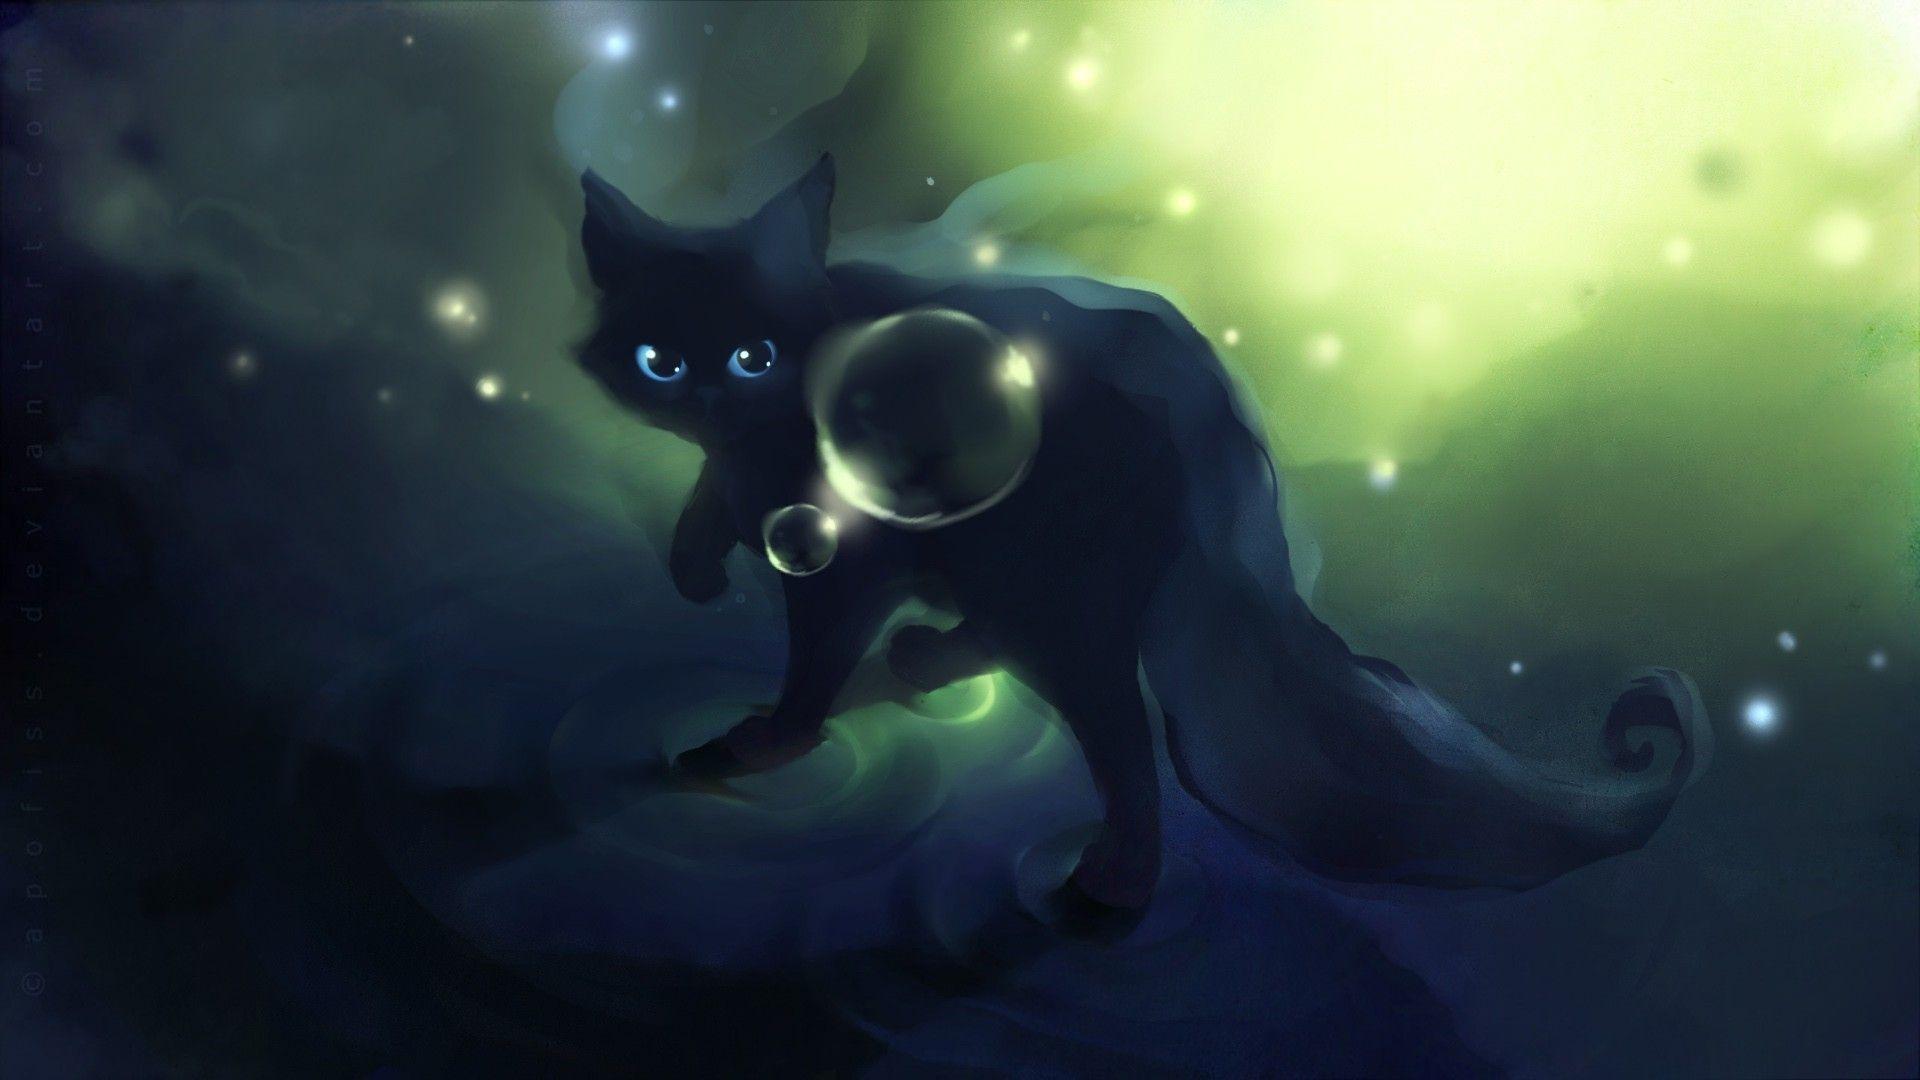 Warrior Cats wallpaperDownload free awesome High Resolution